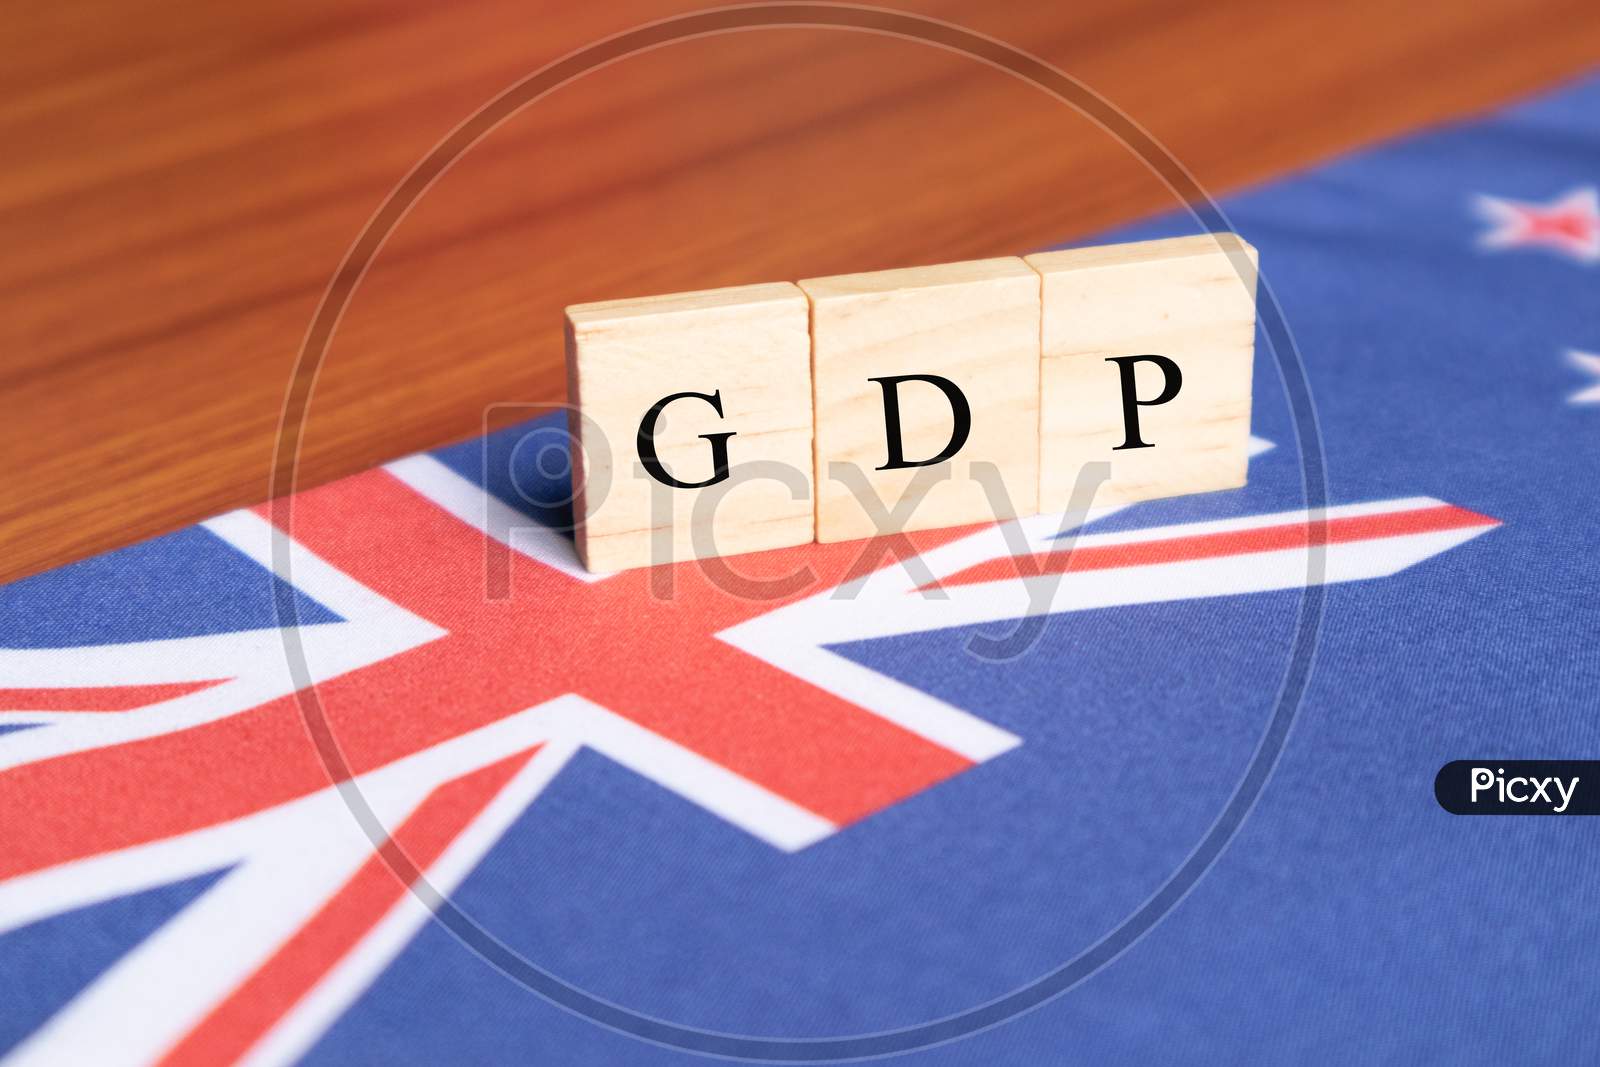 Gross Domestic Product Or Gdp Of Australia In Wooden Block Letters On Australian Flag.